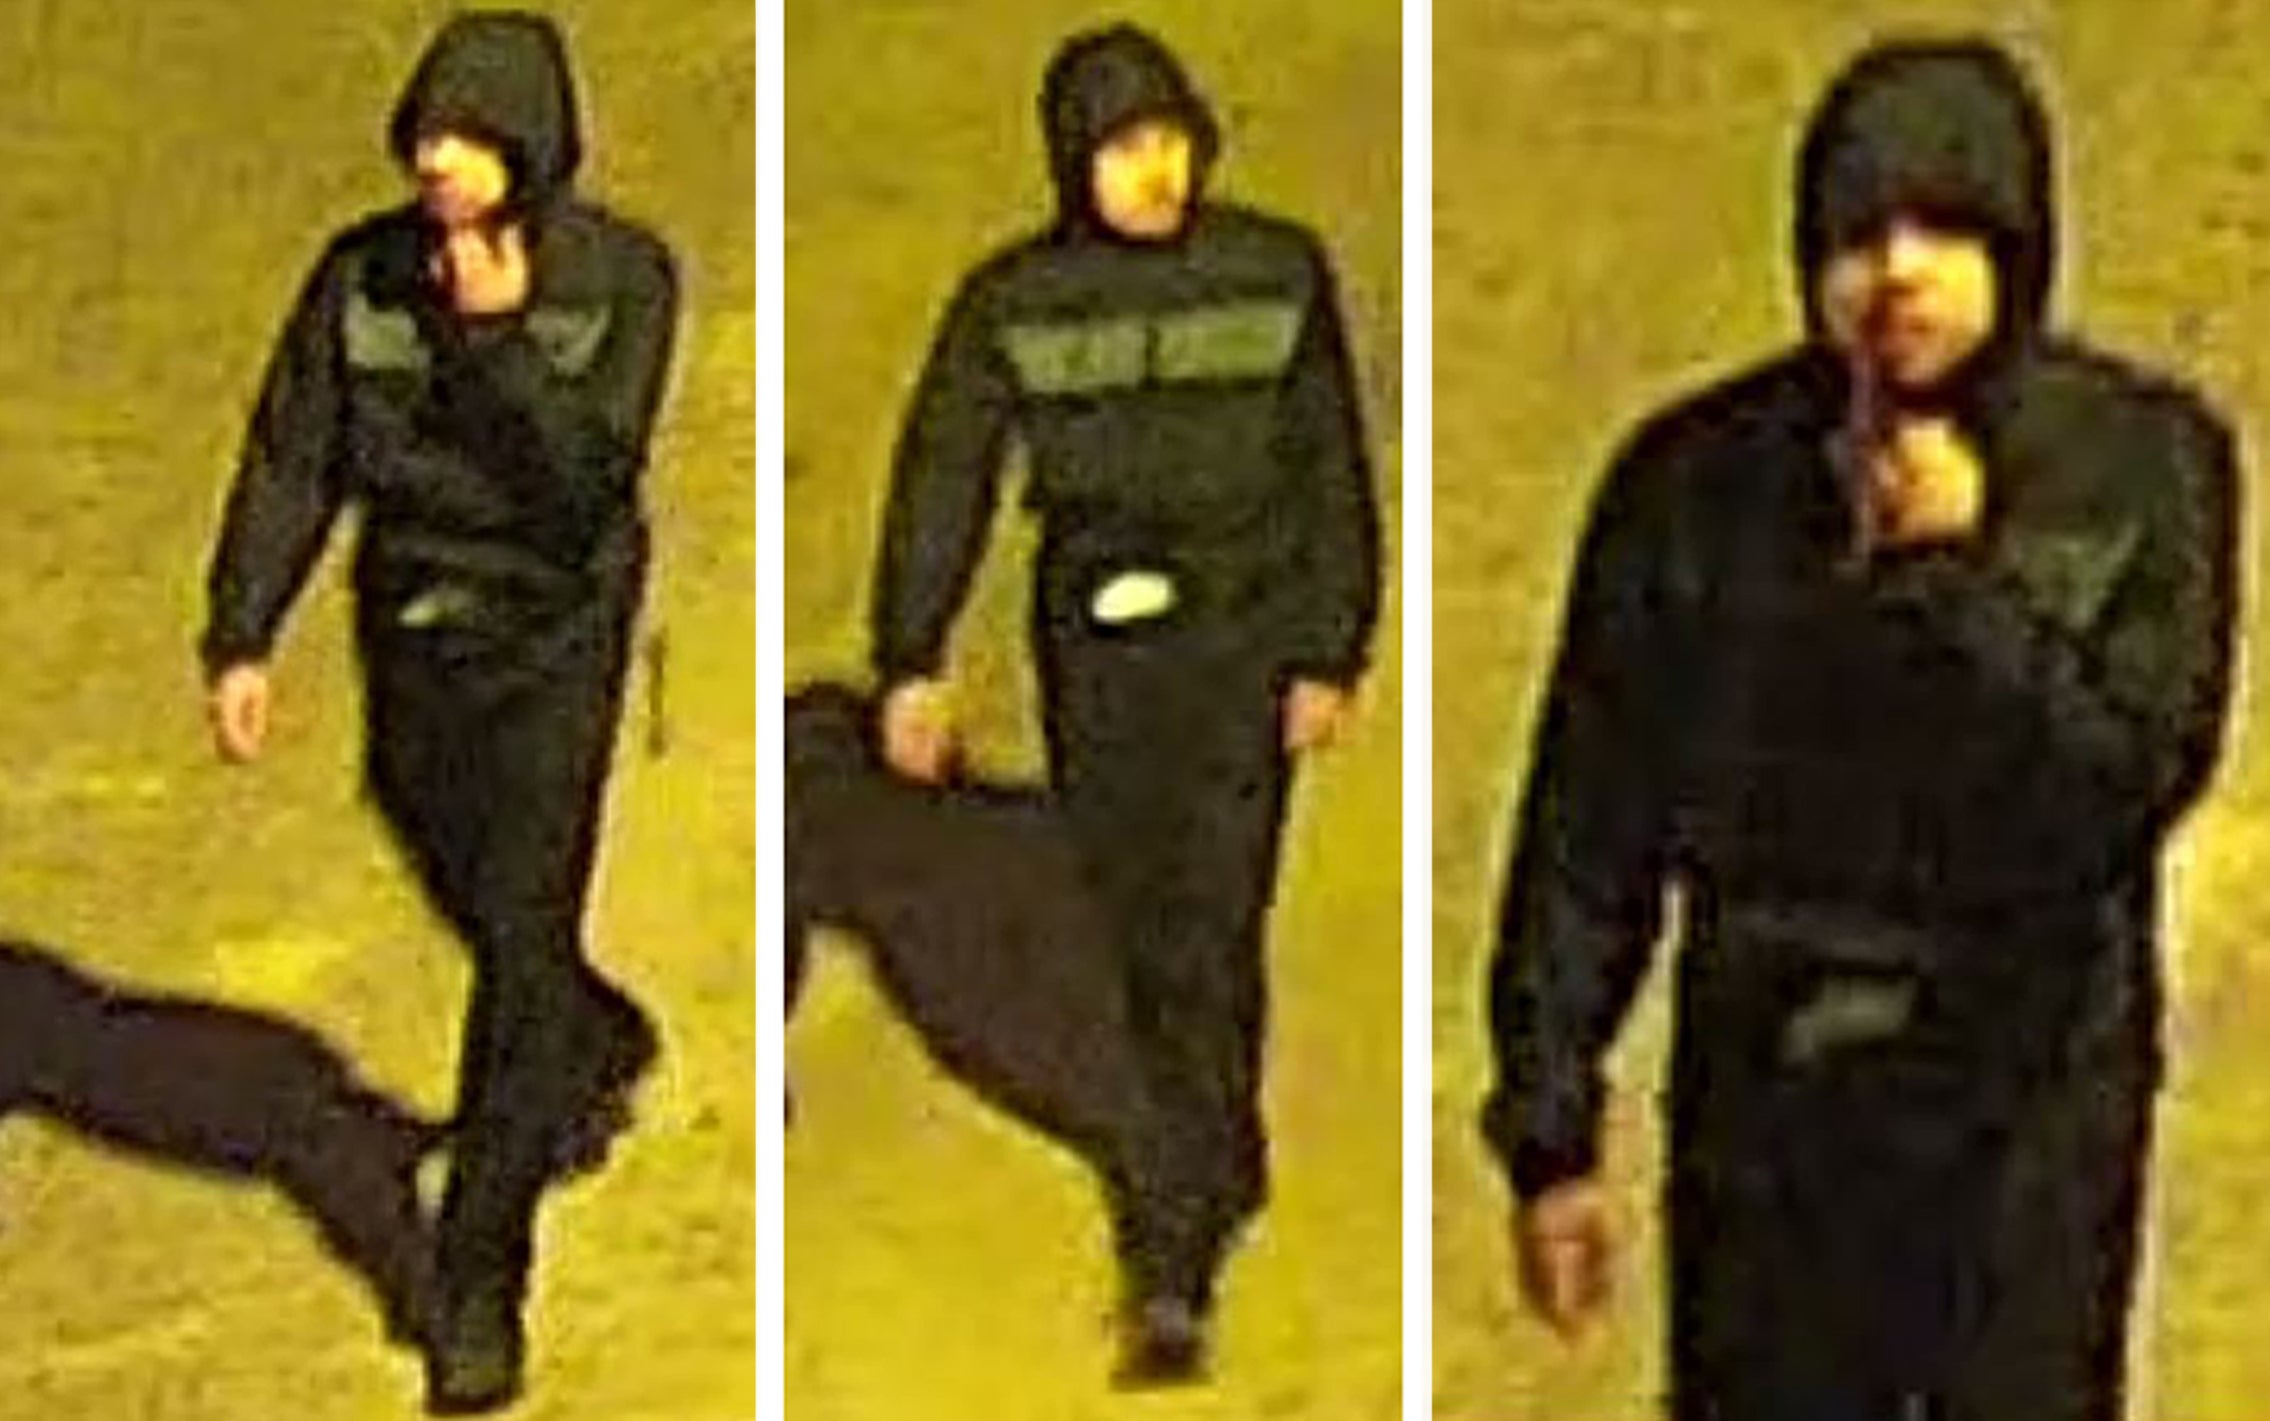 The CCTV images are of a man wearing a dark hooded jacket, with inquiries continuing to confirm his identity